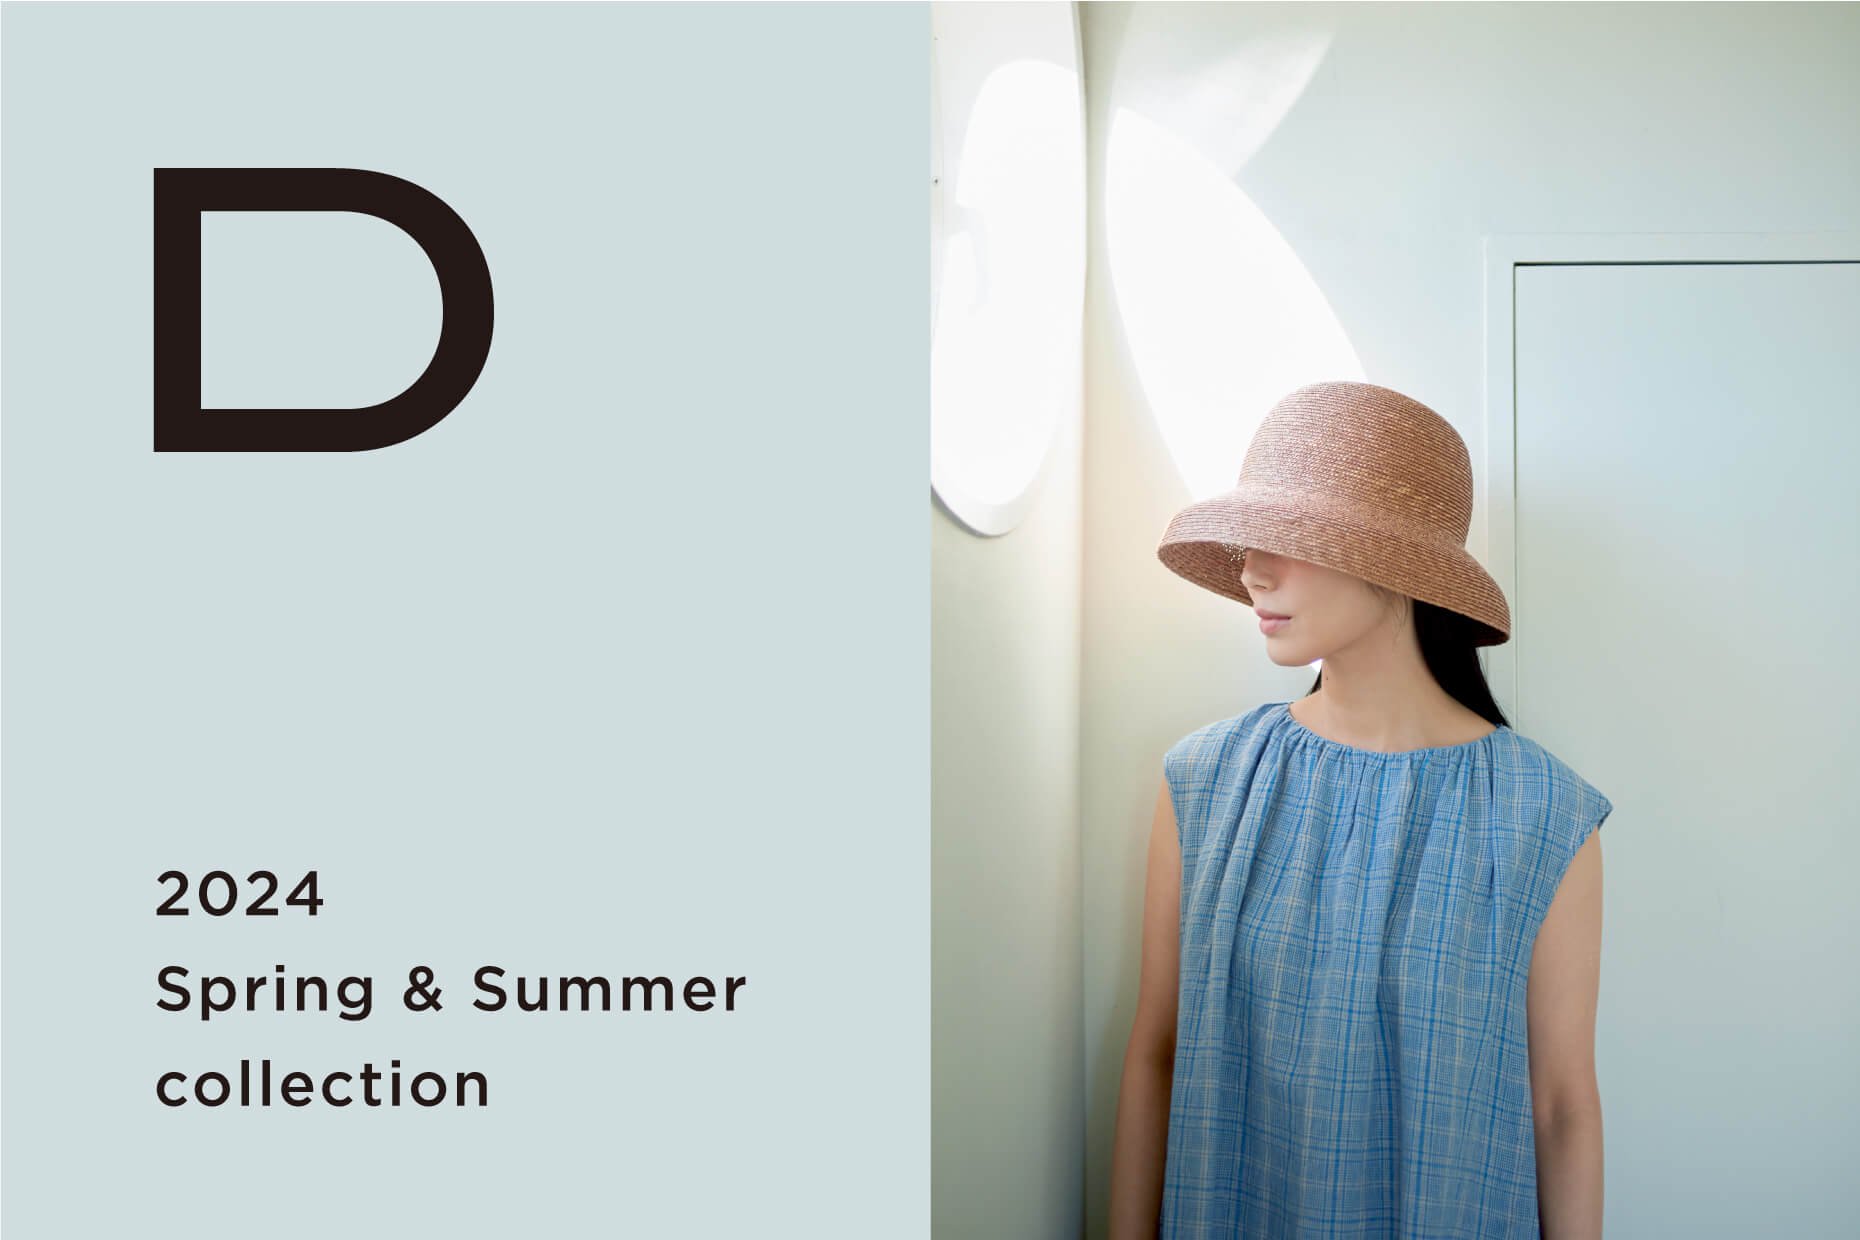 D 2024 Spring & Summer collection